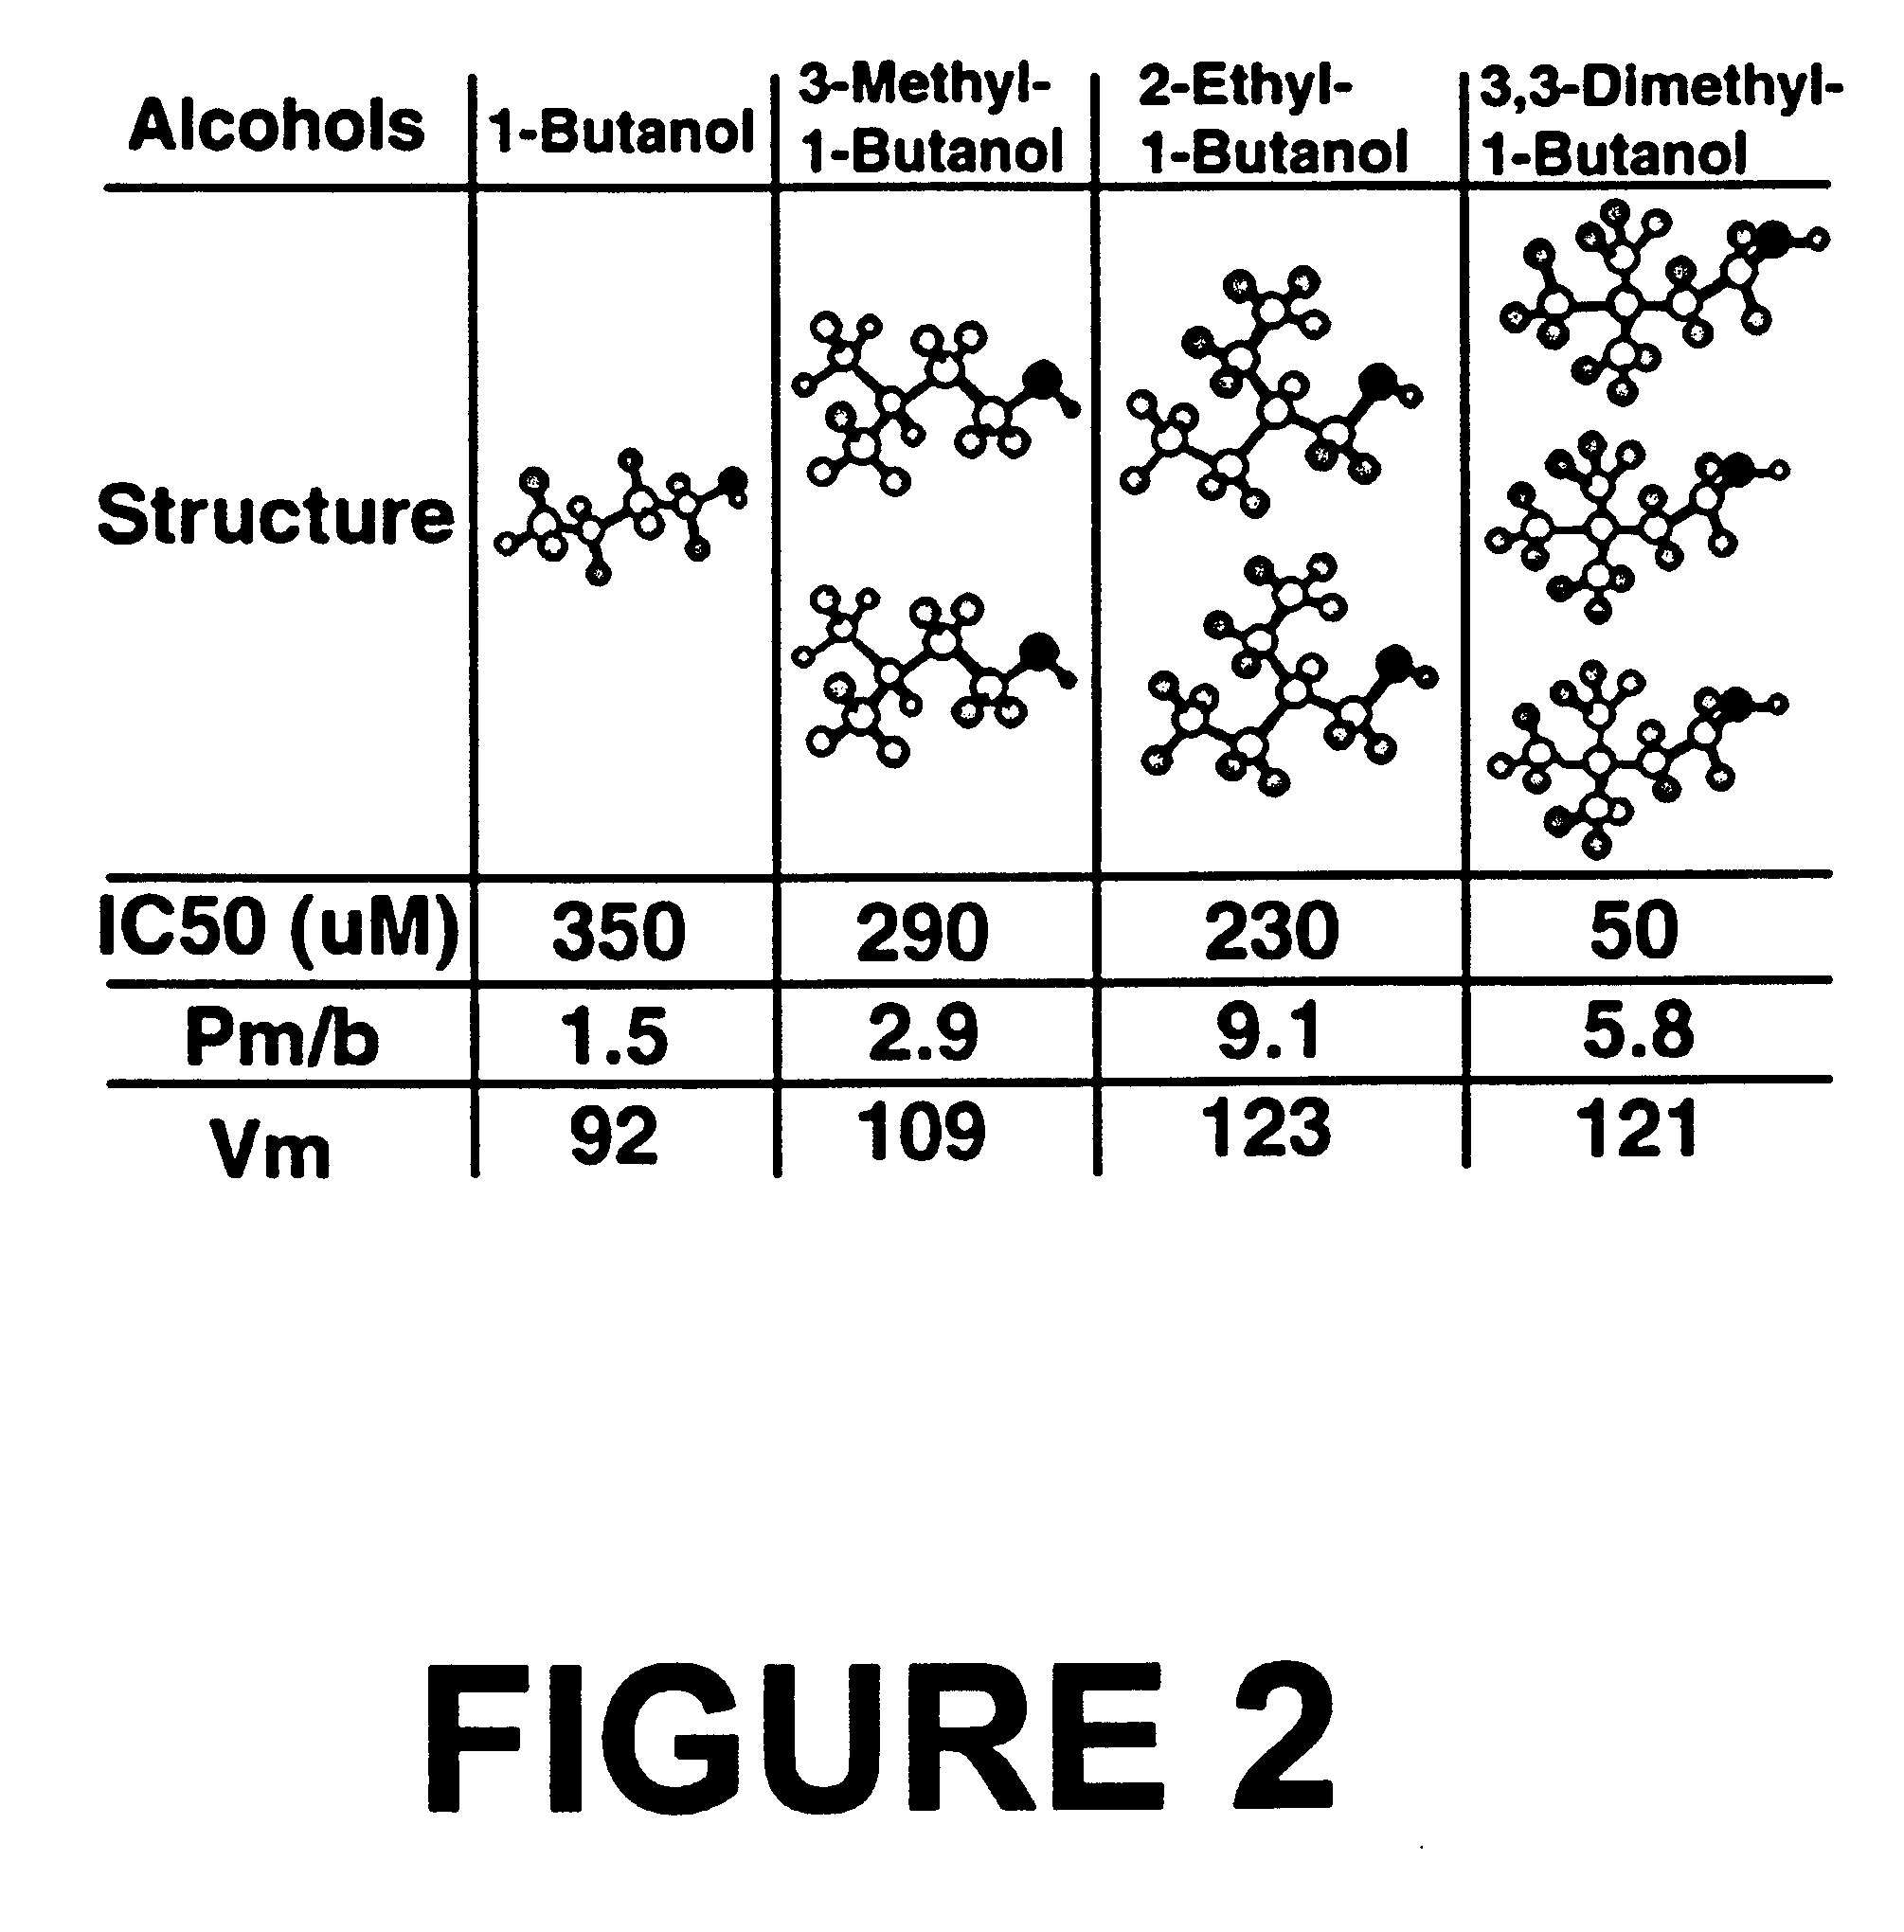 Method for antagonizing inhibition effects of alcohol on cell adhesion